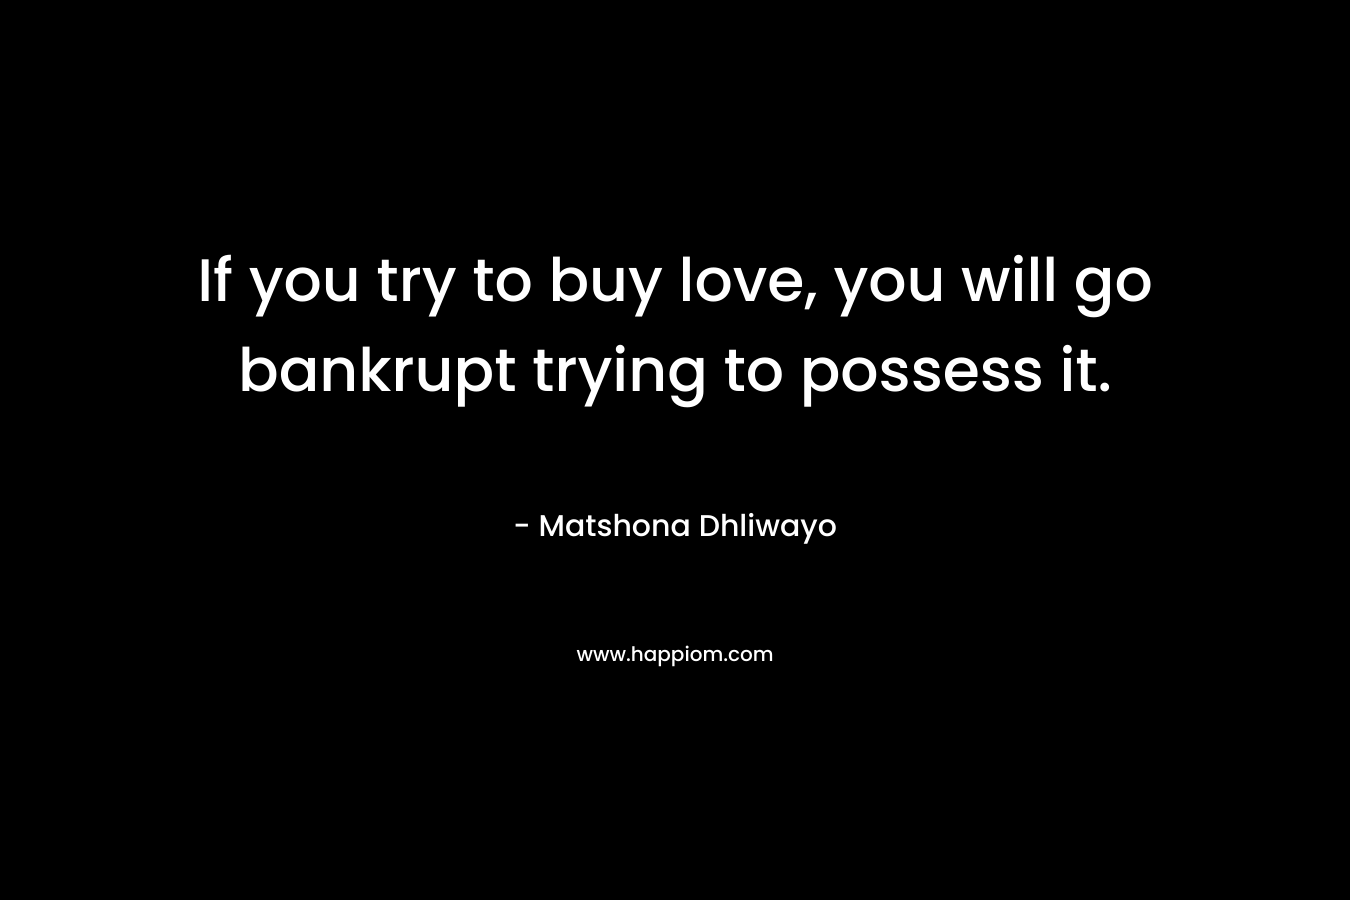 If you try to buy love, you will go bankrupt trying to possess it.